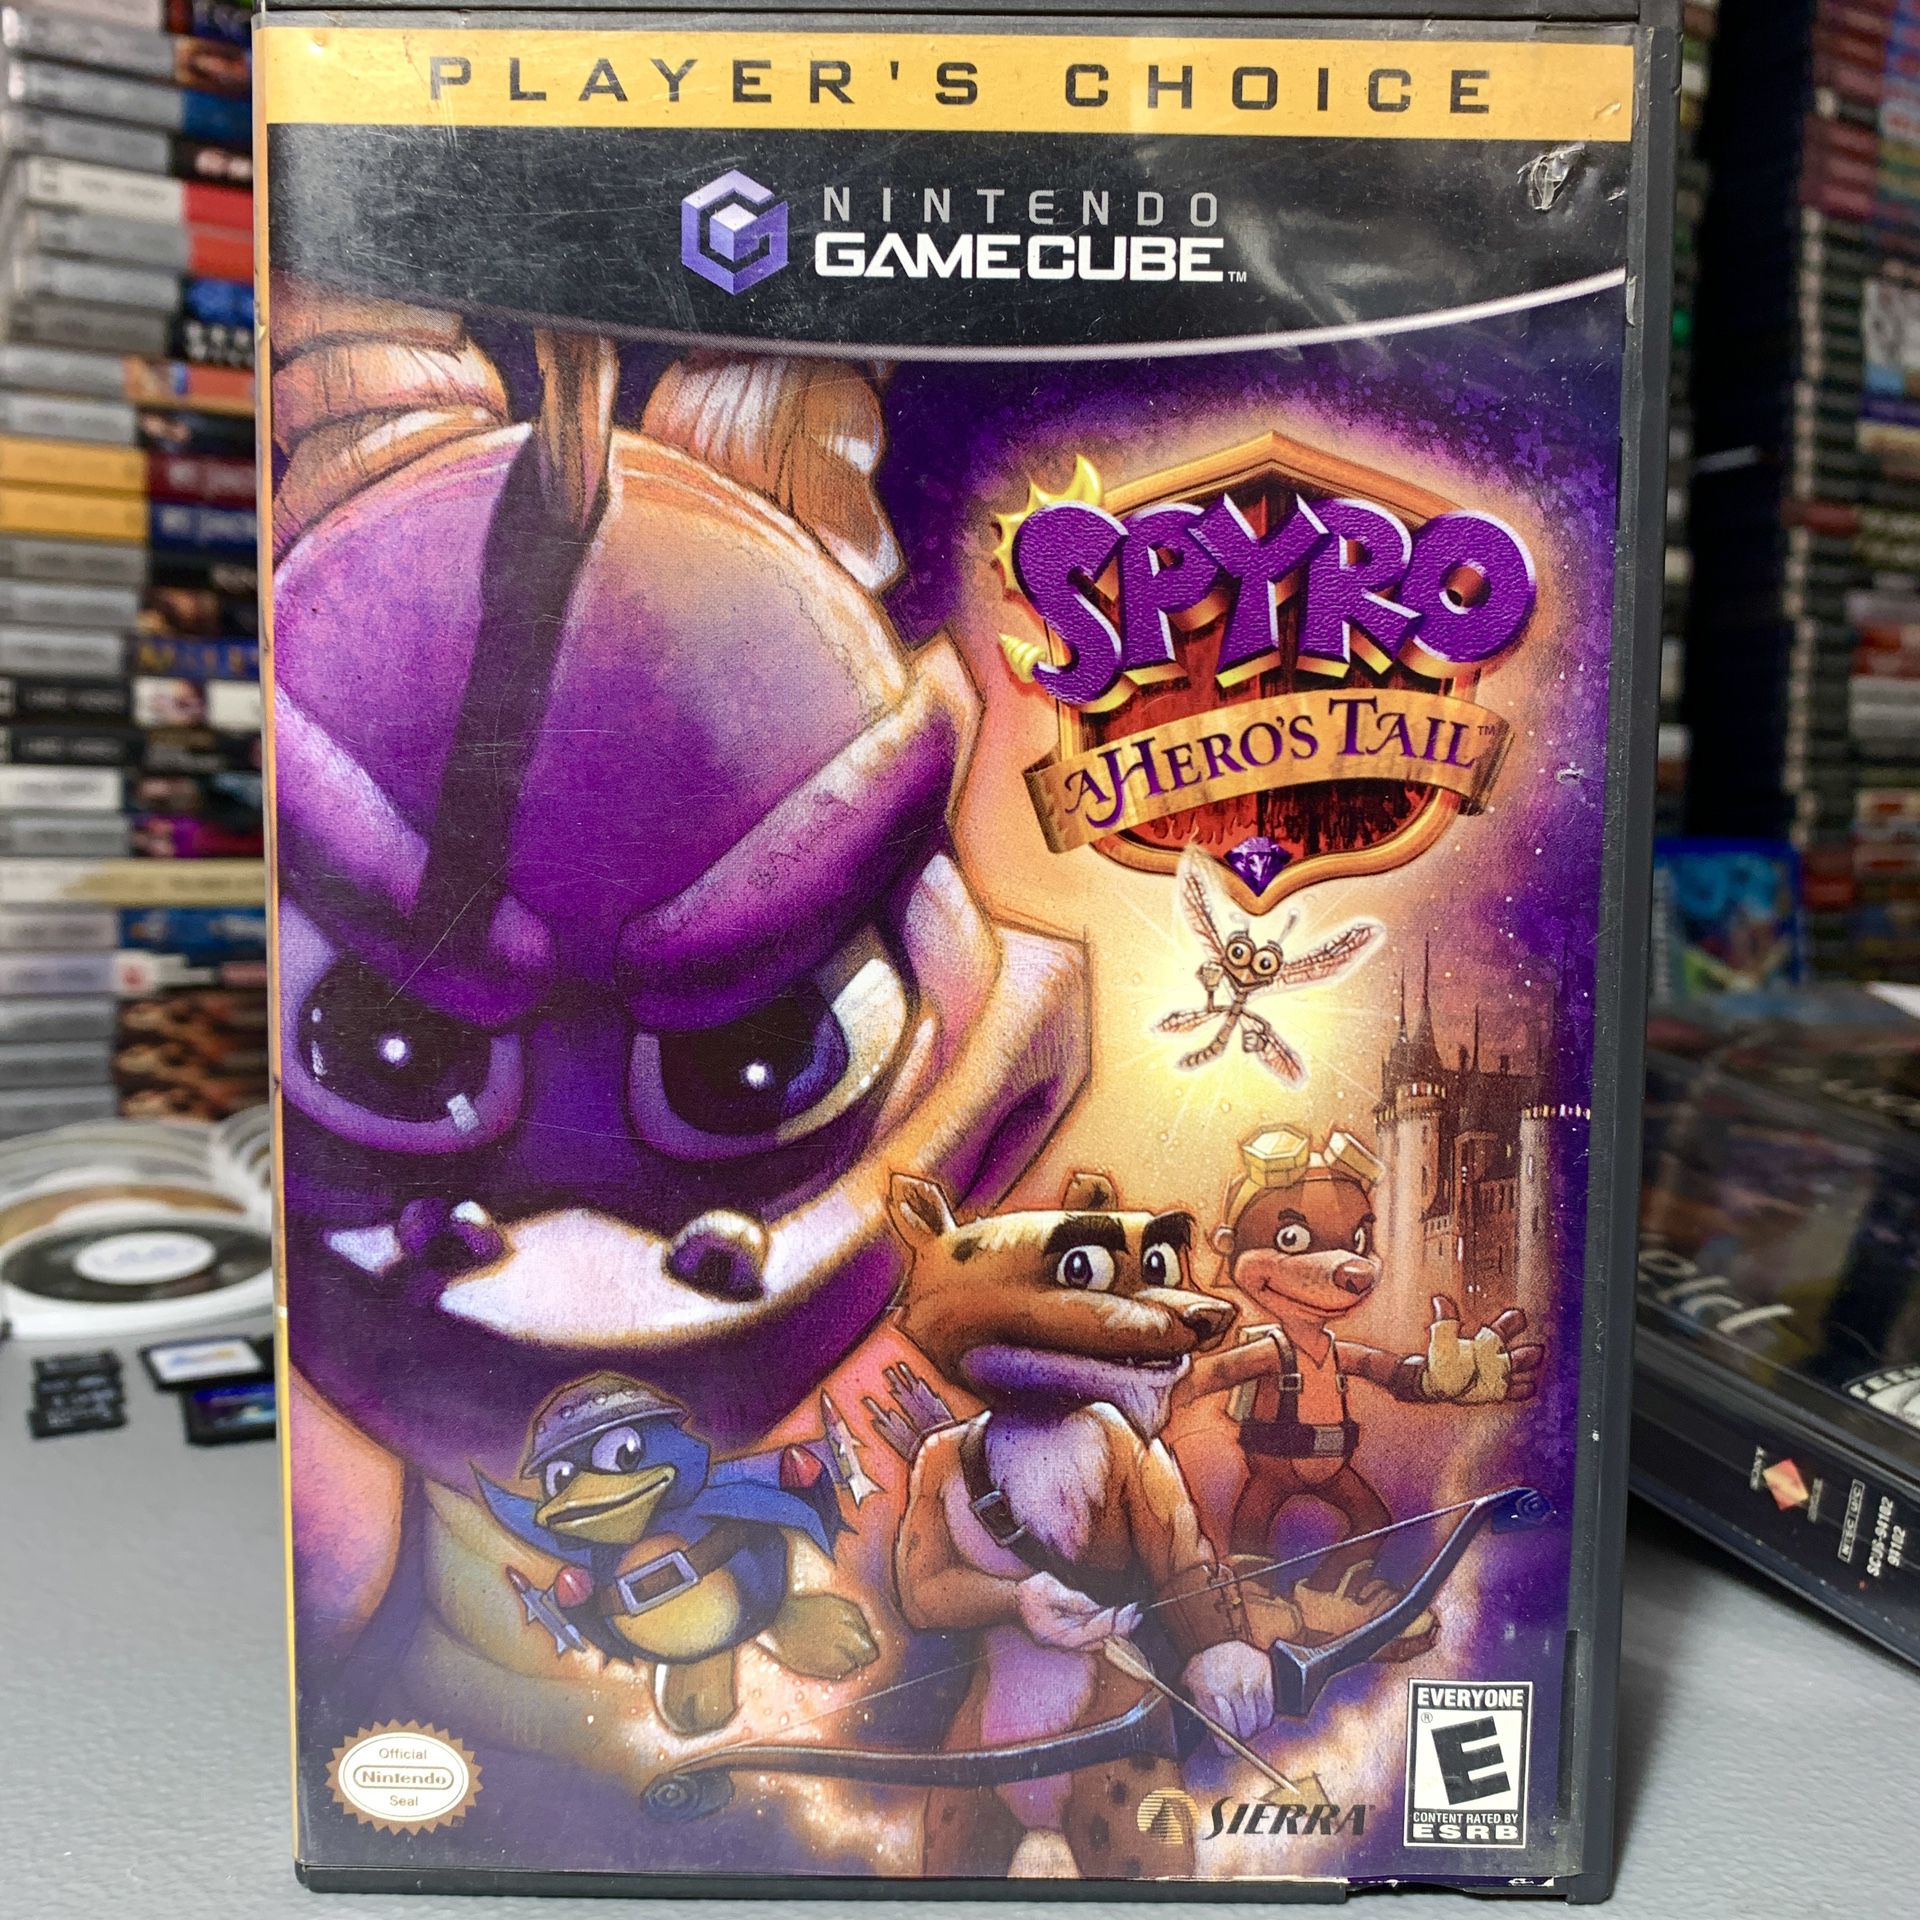 Spyro: A Hero's Tail (Nintendo GameCube, 2004) *TRADE IN YOUR OLD GAMES/TCG/COMICS/PHONES/VHS FOR CSH OR CREDIT HERE*